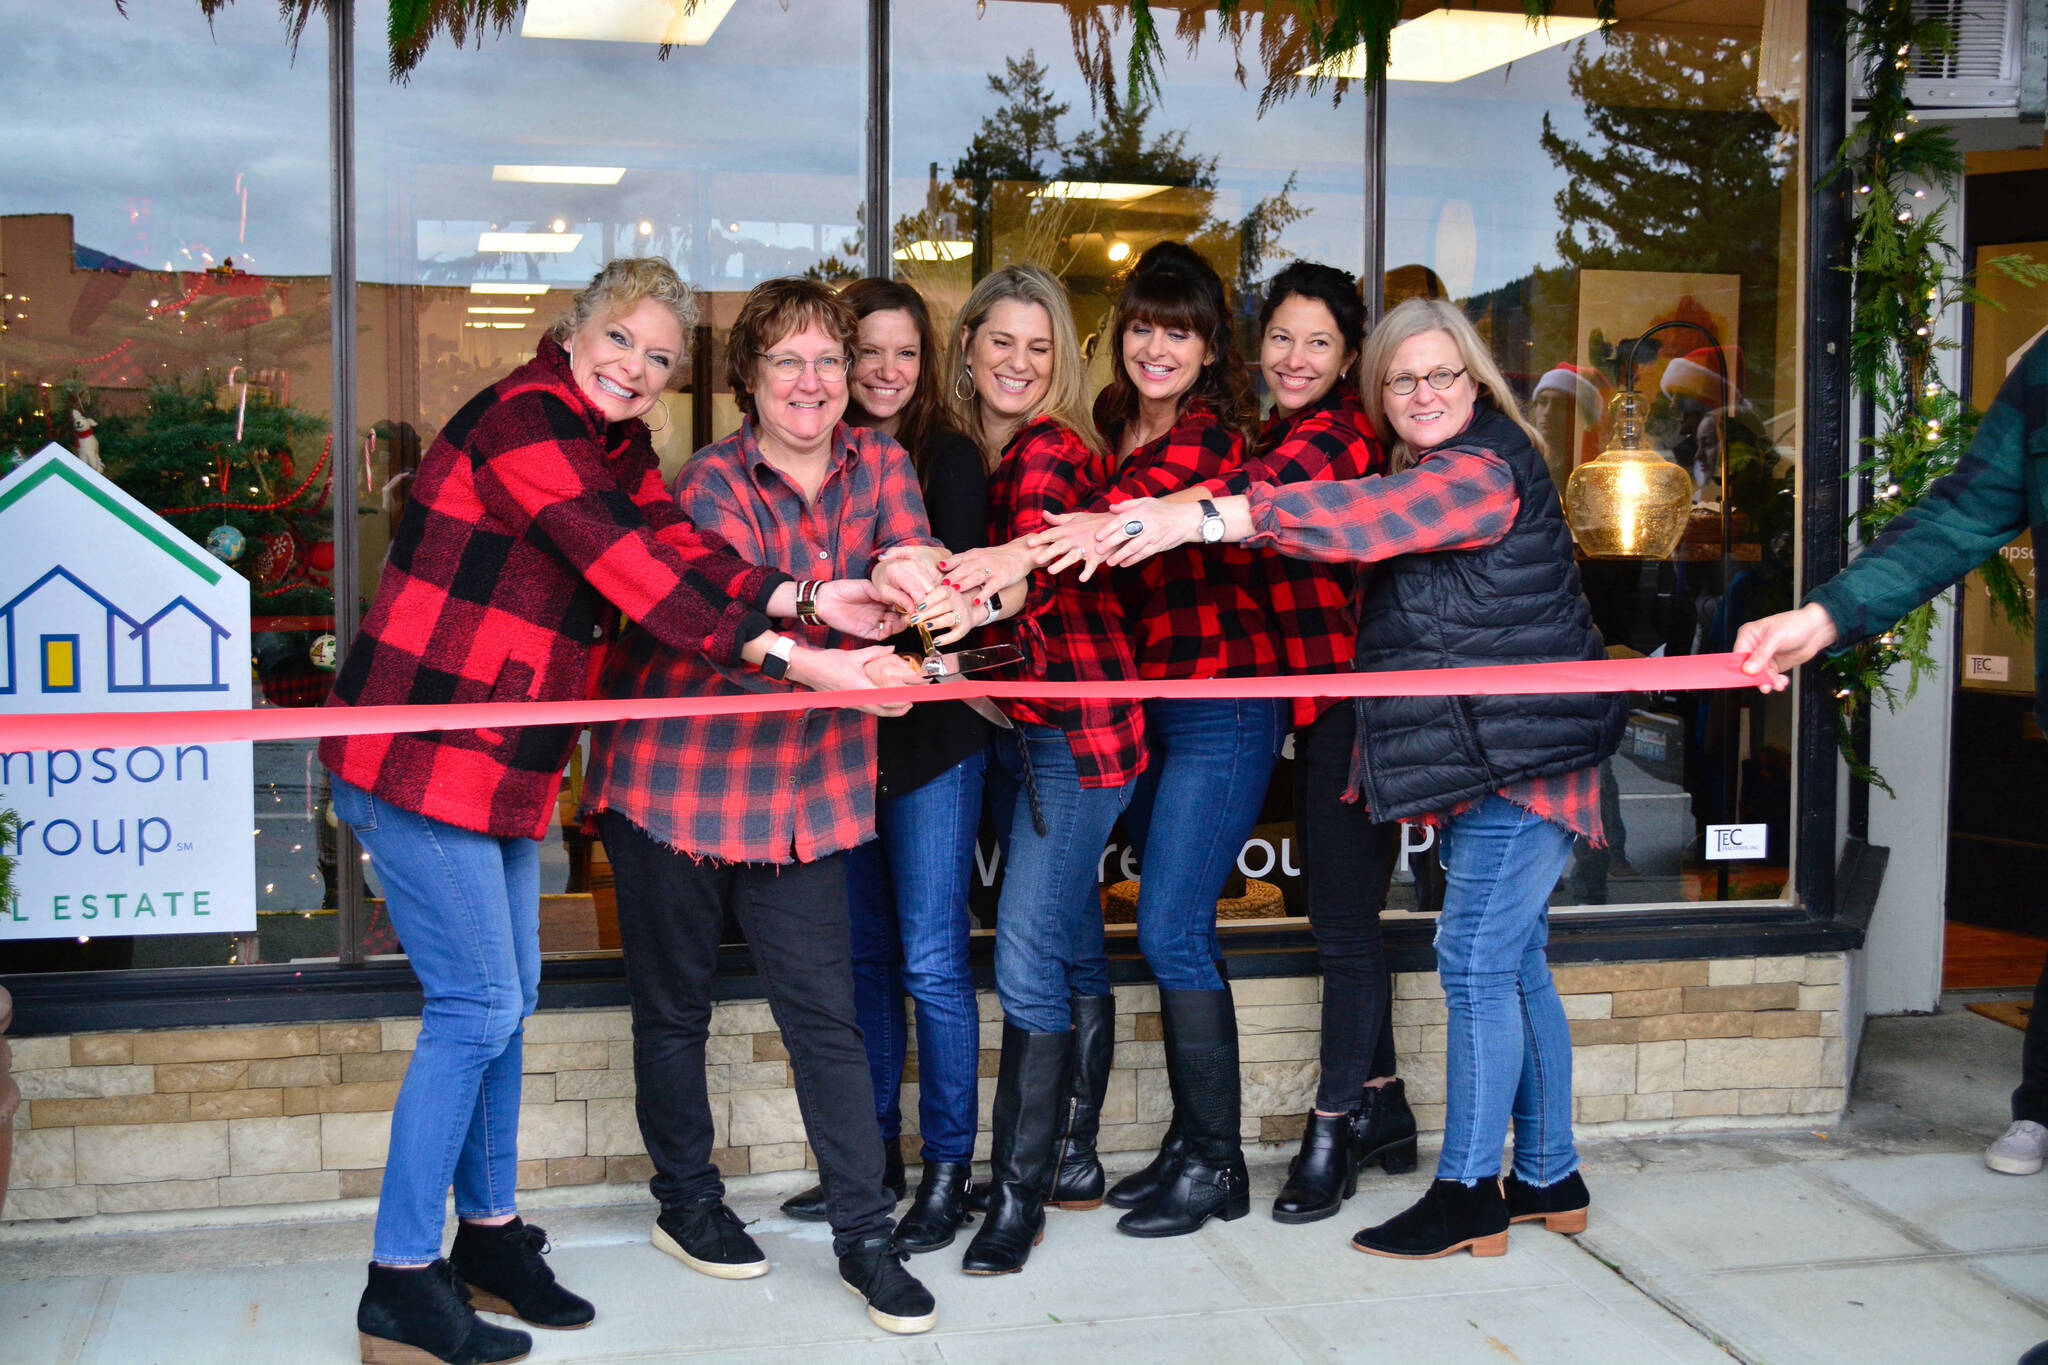 Members of Simpson Group Real Estate team at its grand opening on Nov. 27: (L to R) Sandy Navidi, Karin Simpson, Debi Hill, Karin Ayling, Michelle Brucchieri, Kim Thayer and Alyssa Sprague. Courtesy Photo.